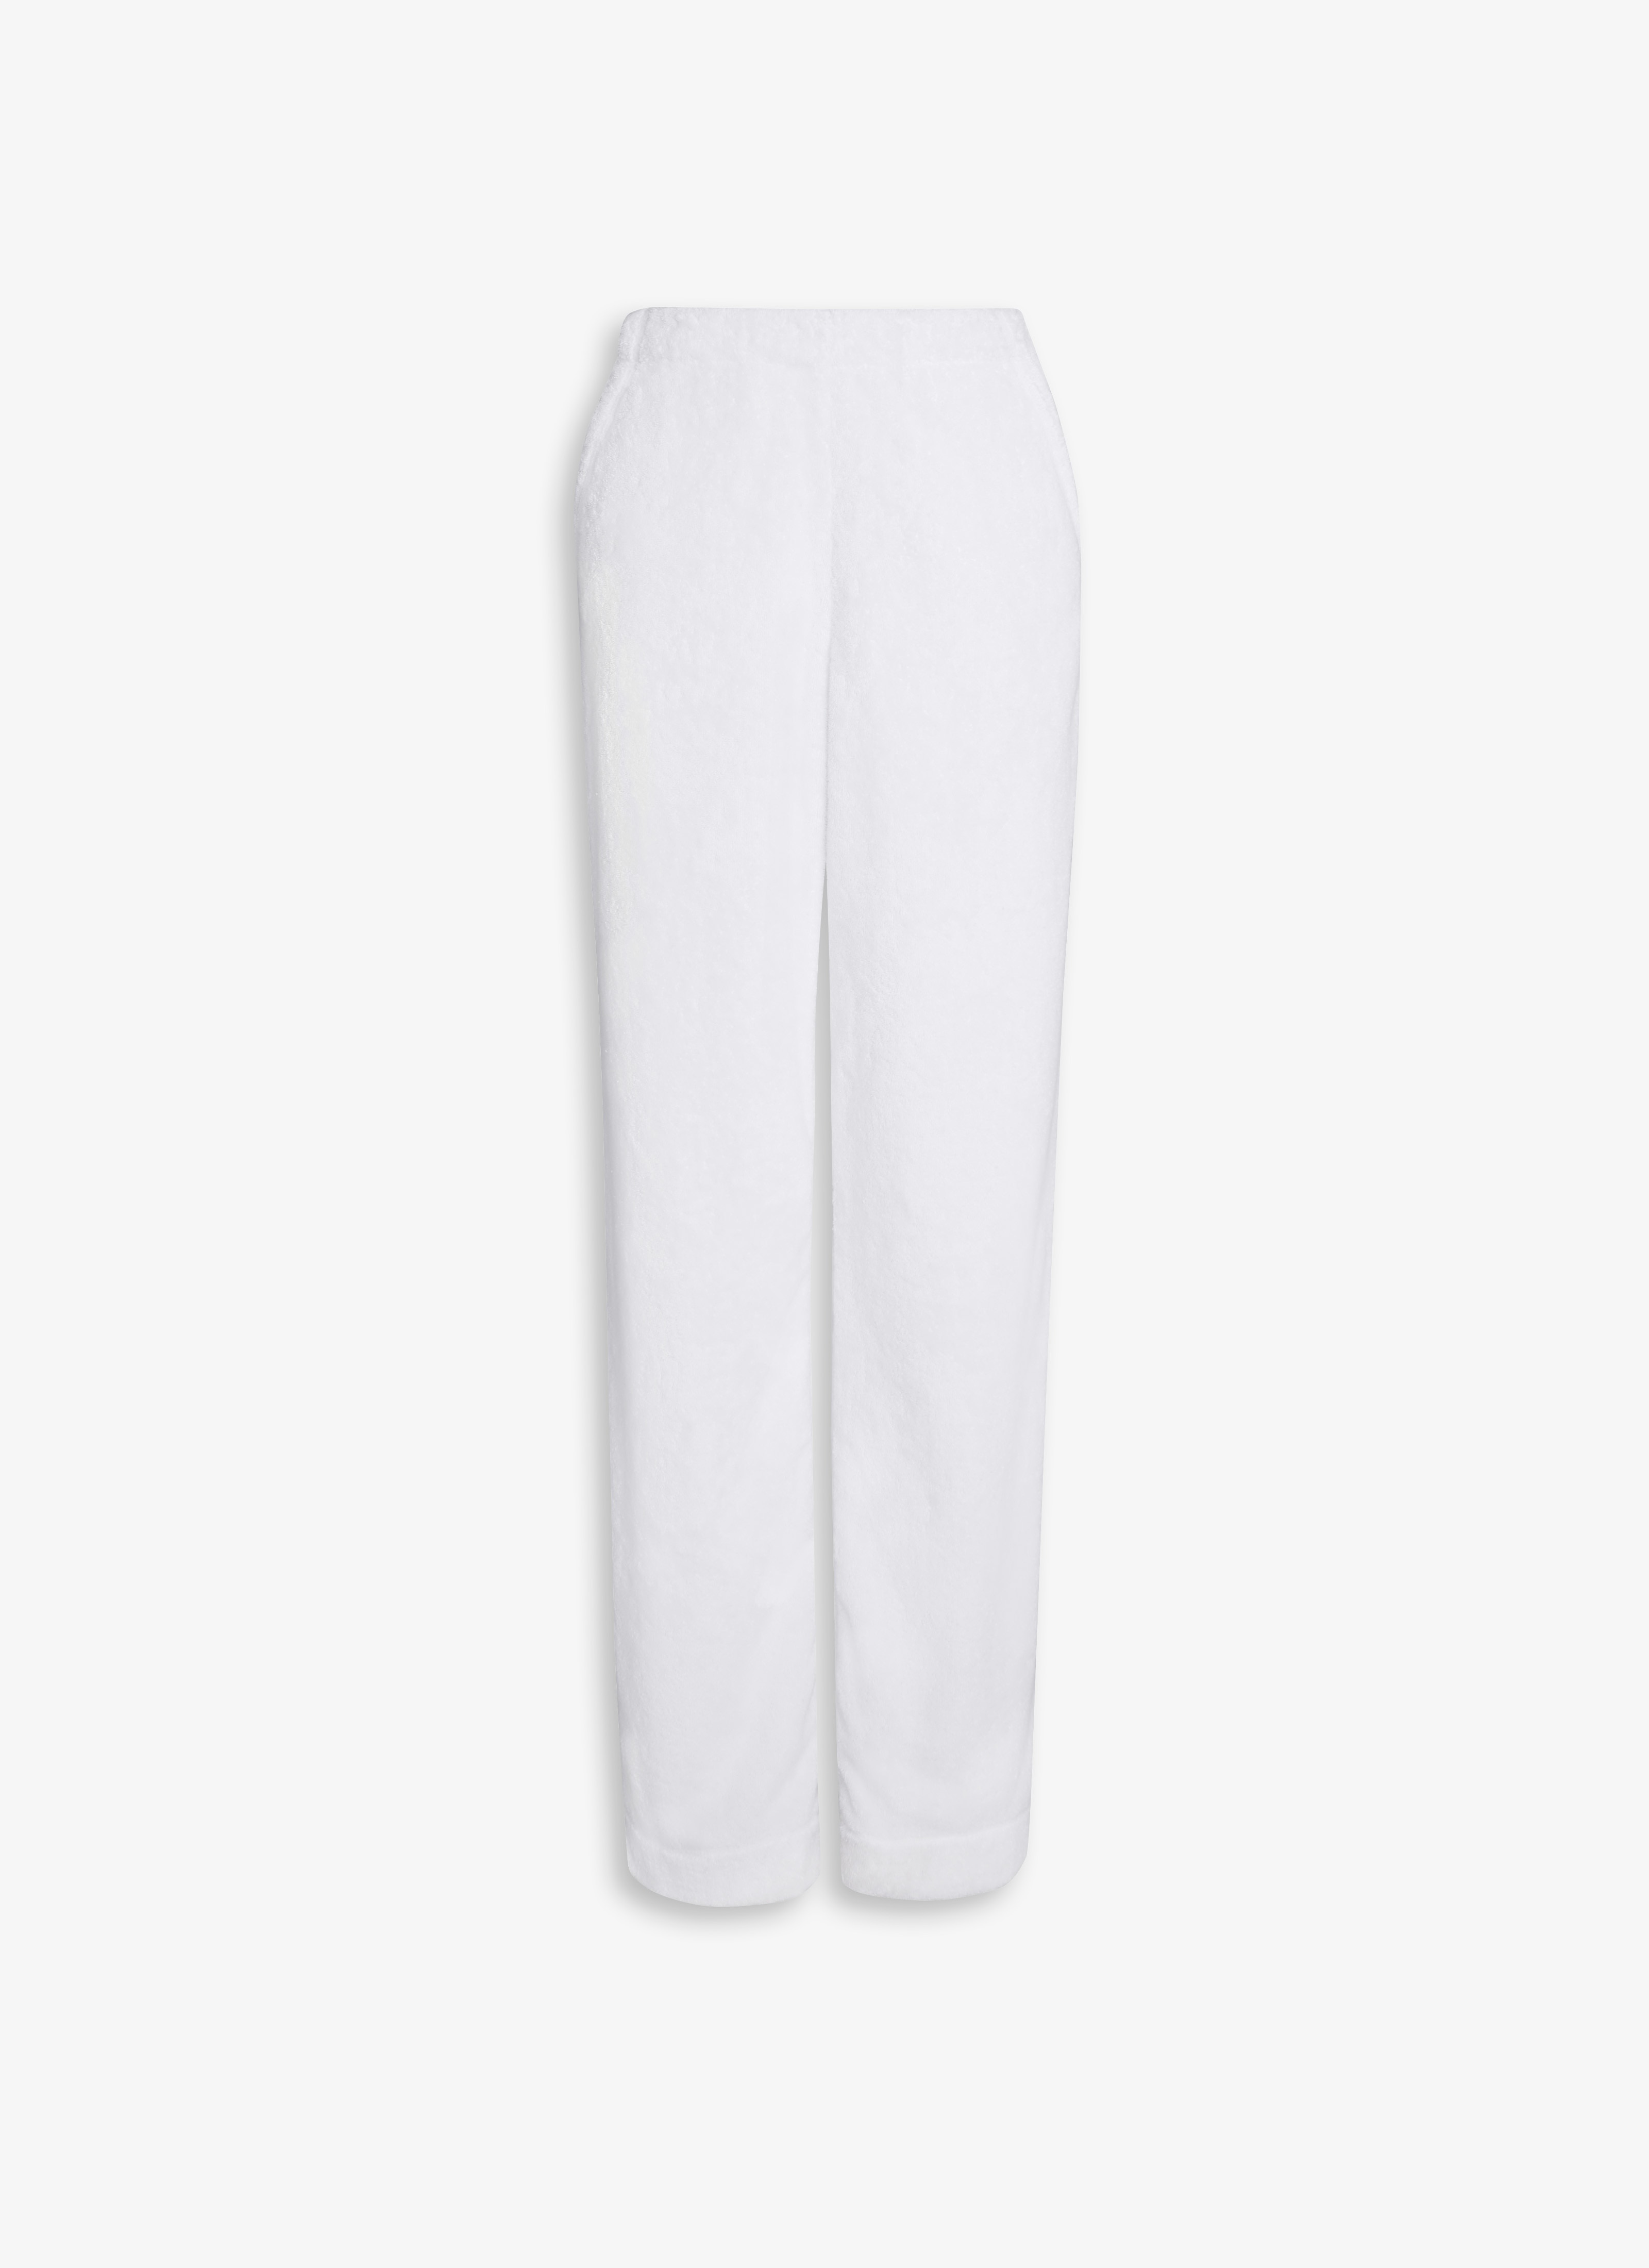 LOOSE PANTS IN COTTON TERRY - 1